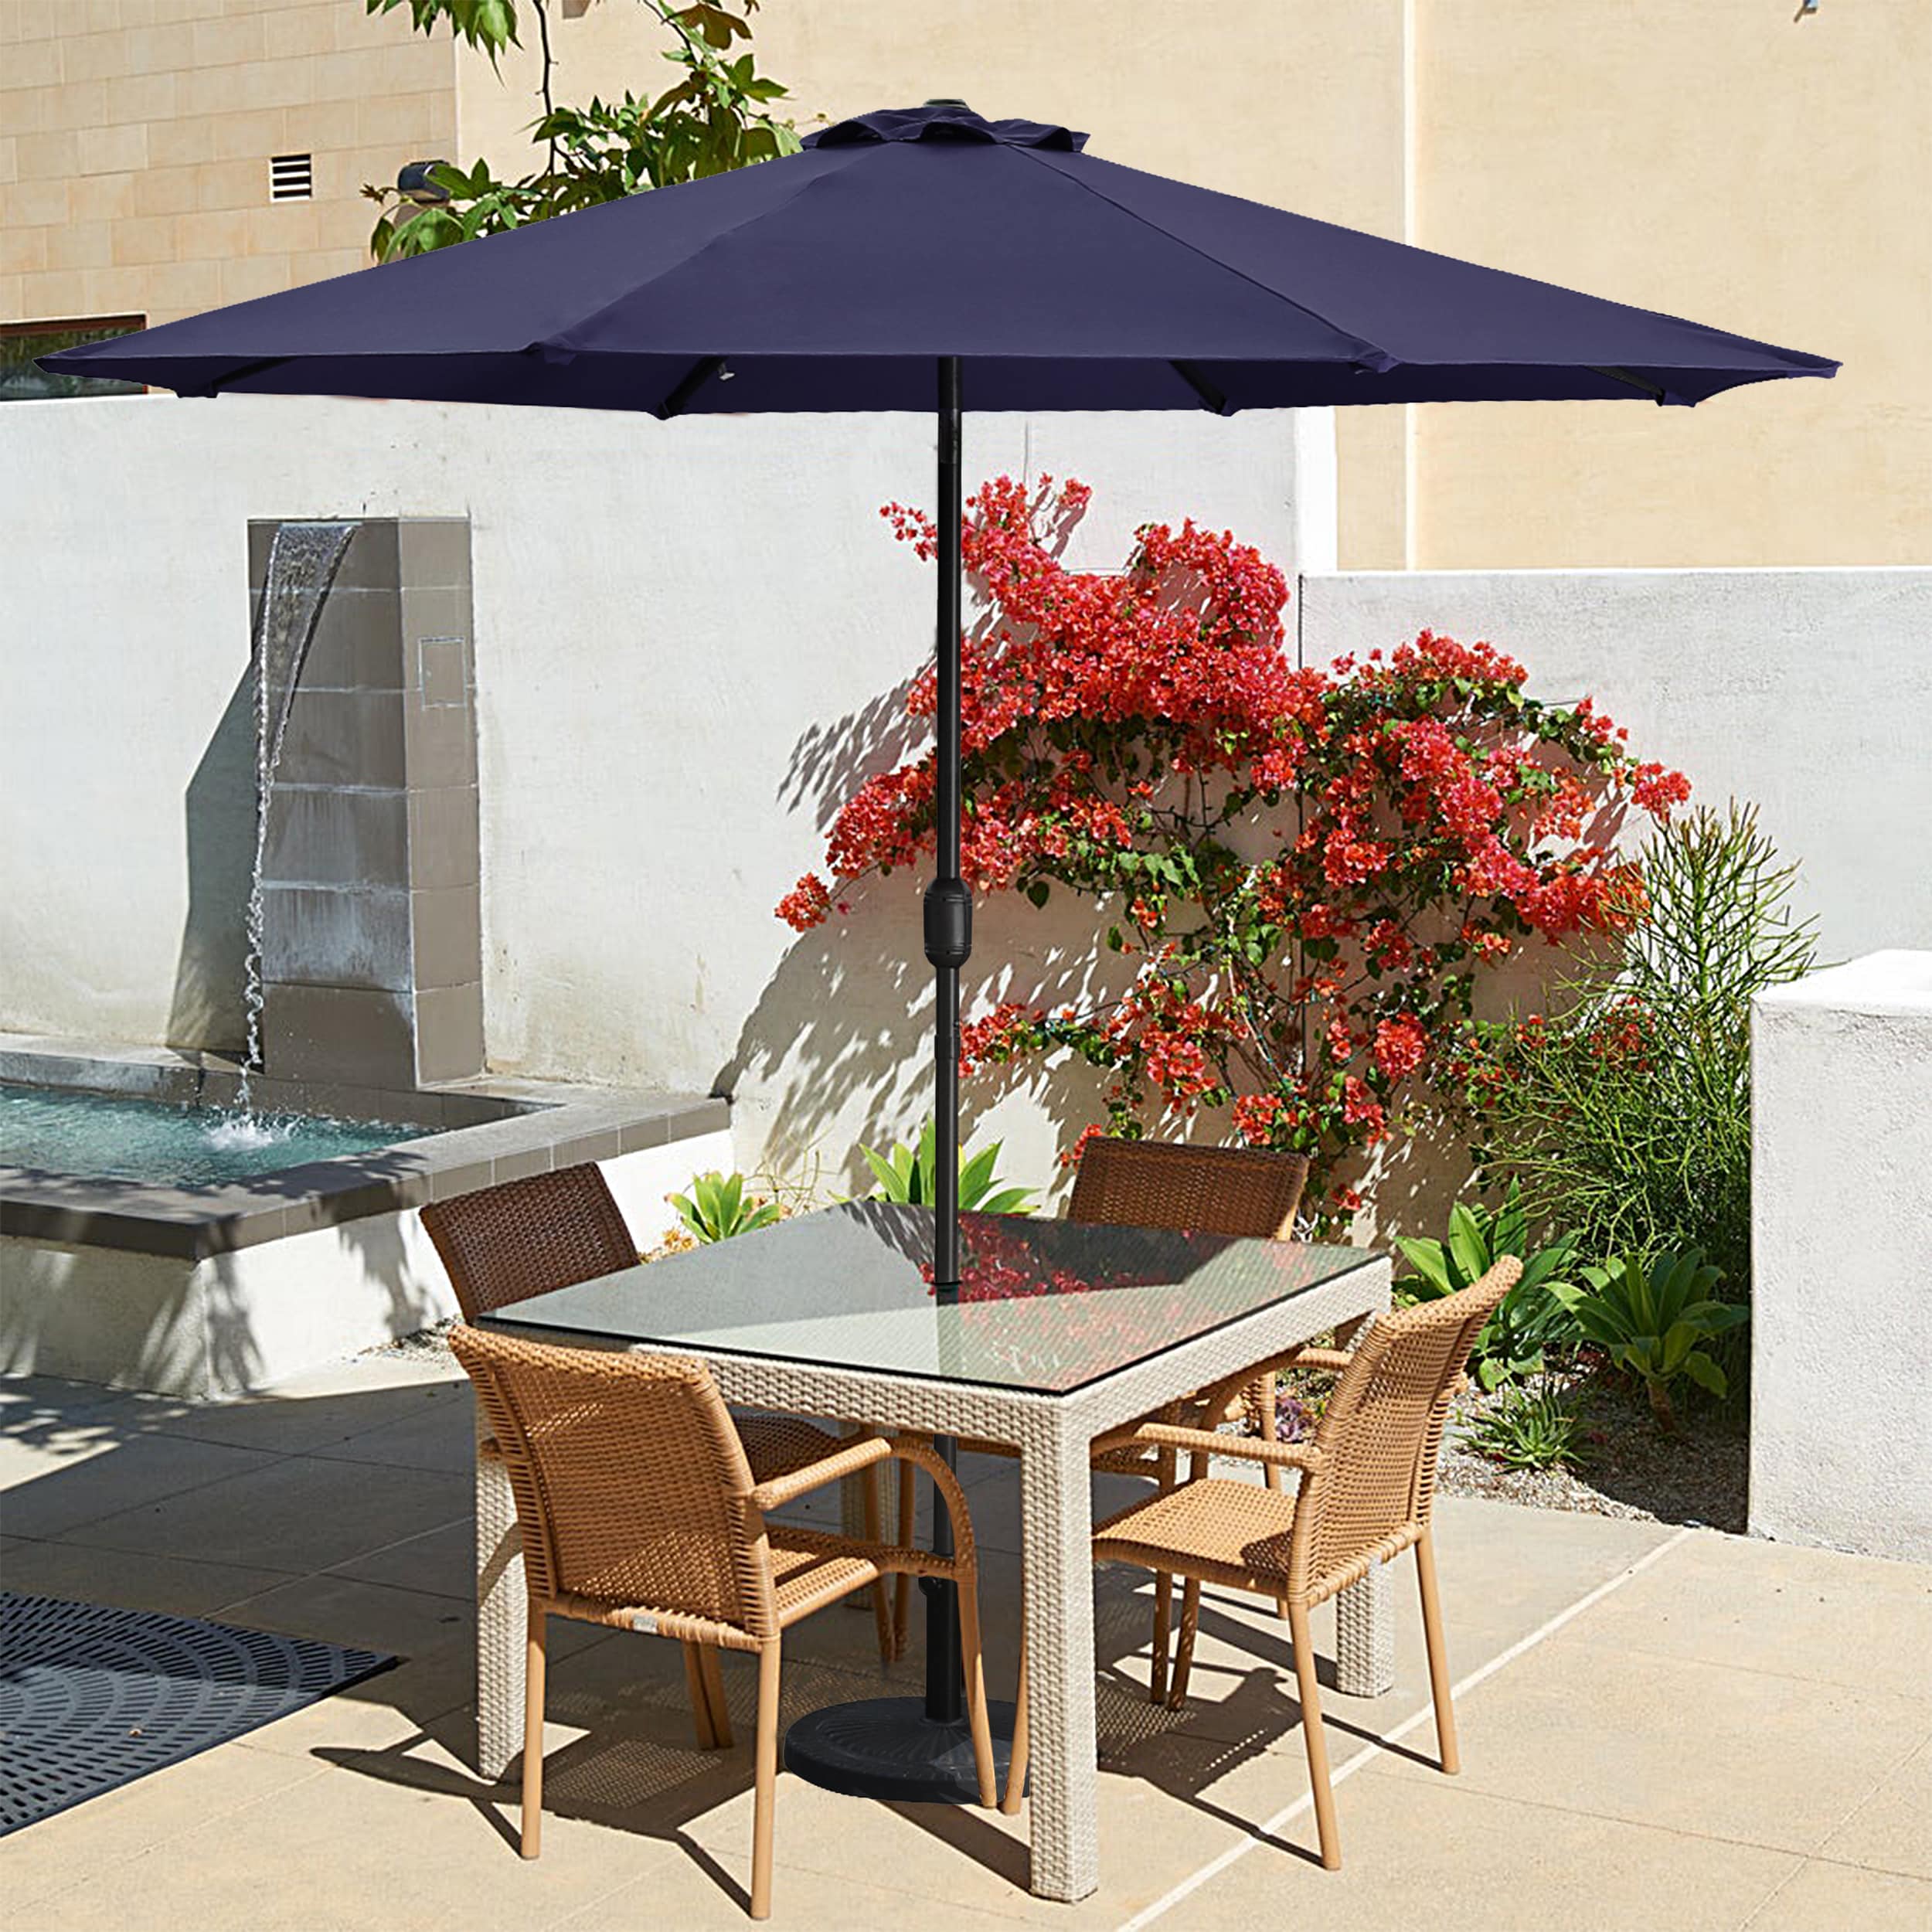 Tempera 9' Outdoor Market Patio Table Umbrella with Auto Tilt and Crank,Large Sun Umbrella with Sturdy Pole&Fade resistant canopy,Easy to set,Beige Taupe Stripe 